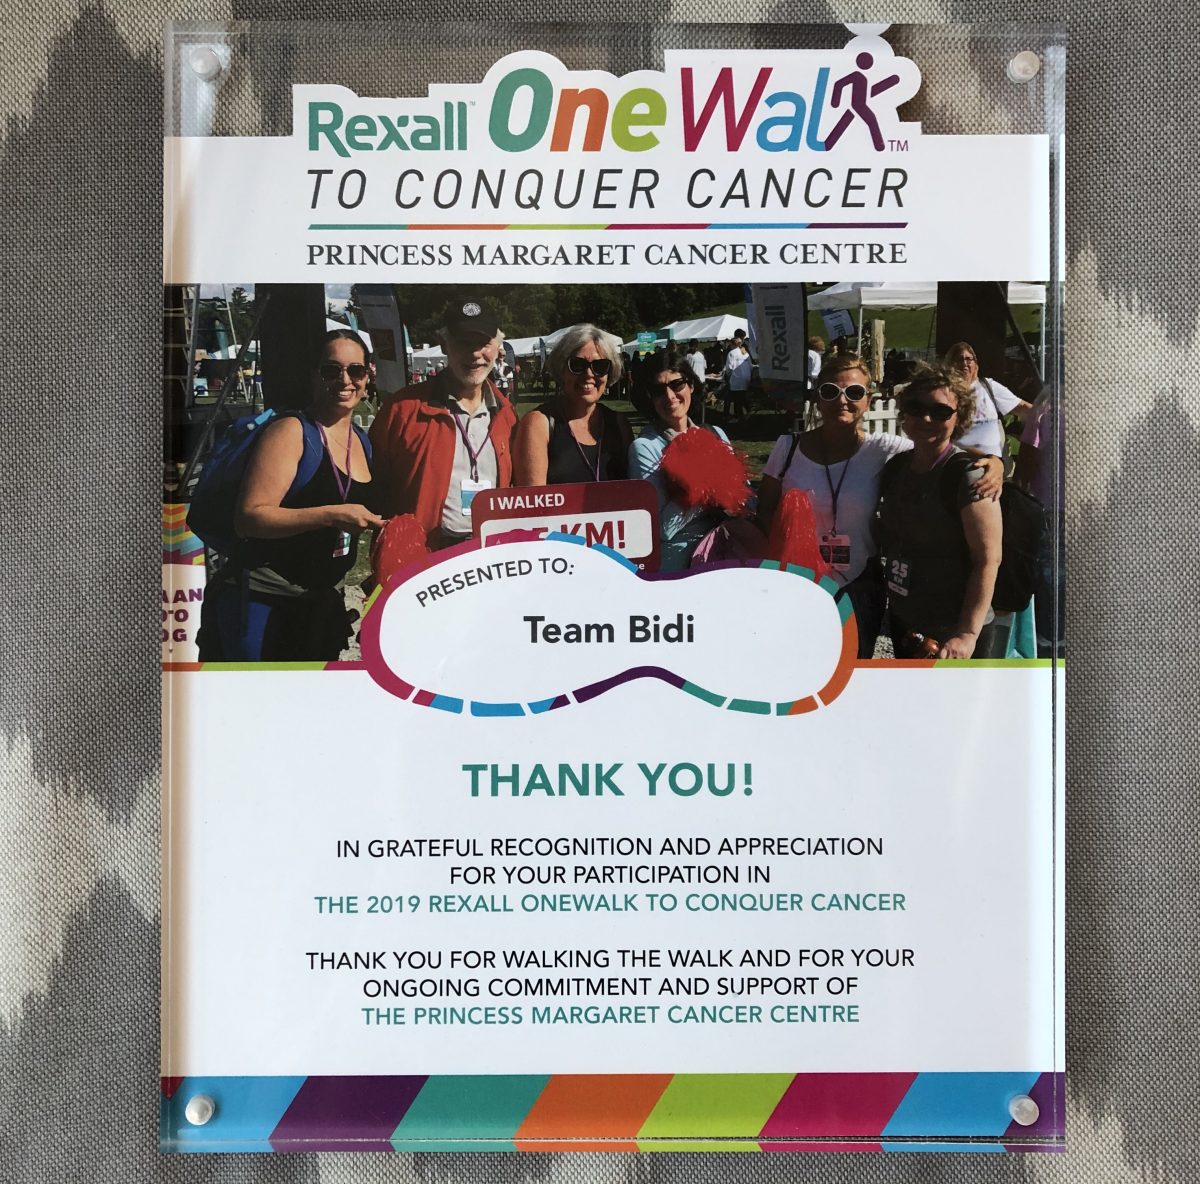 A plaque with title, "Rexall One Walk to Conquer Cancer. Princess Margaret Cancer Centre." A photo of Team Bidi and the text "Presented to Team Bidi. Thank you! In grateful recognition and appreciation for your participation in the 2019 REXALL ONEWALK TO CONQUER CANCER. Thank you for walking the walk and for your ongoing commitment and support of THE PRINCESS MARGARET CANCER CENTRE"